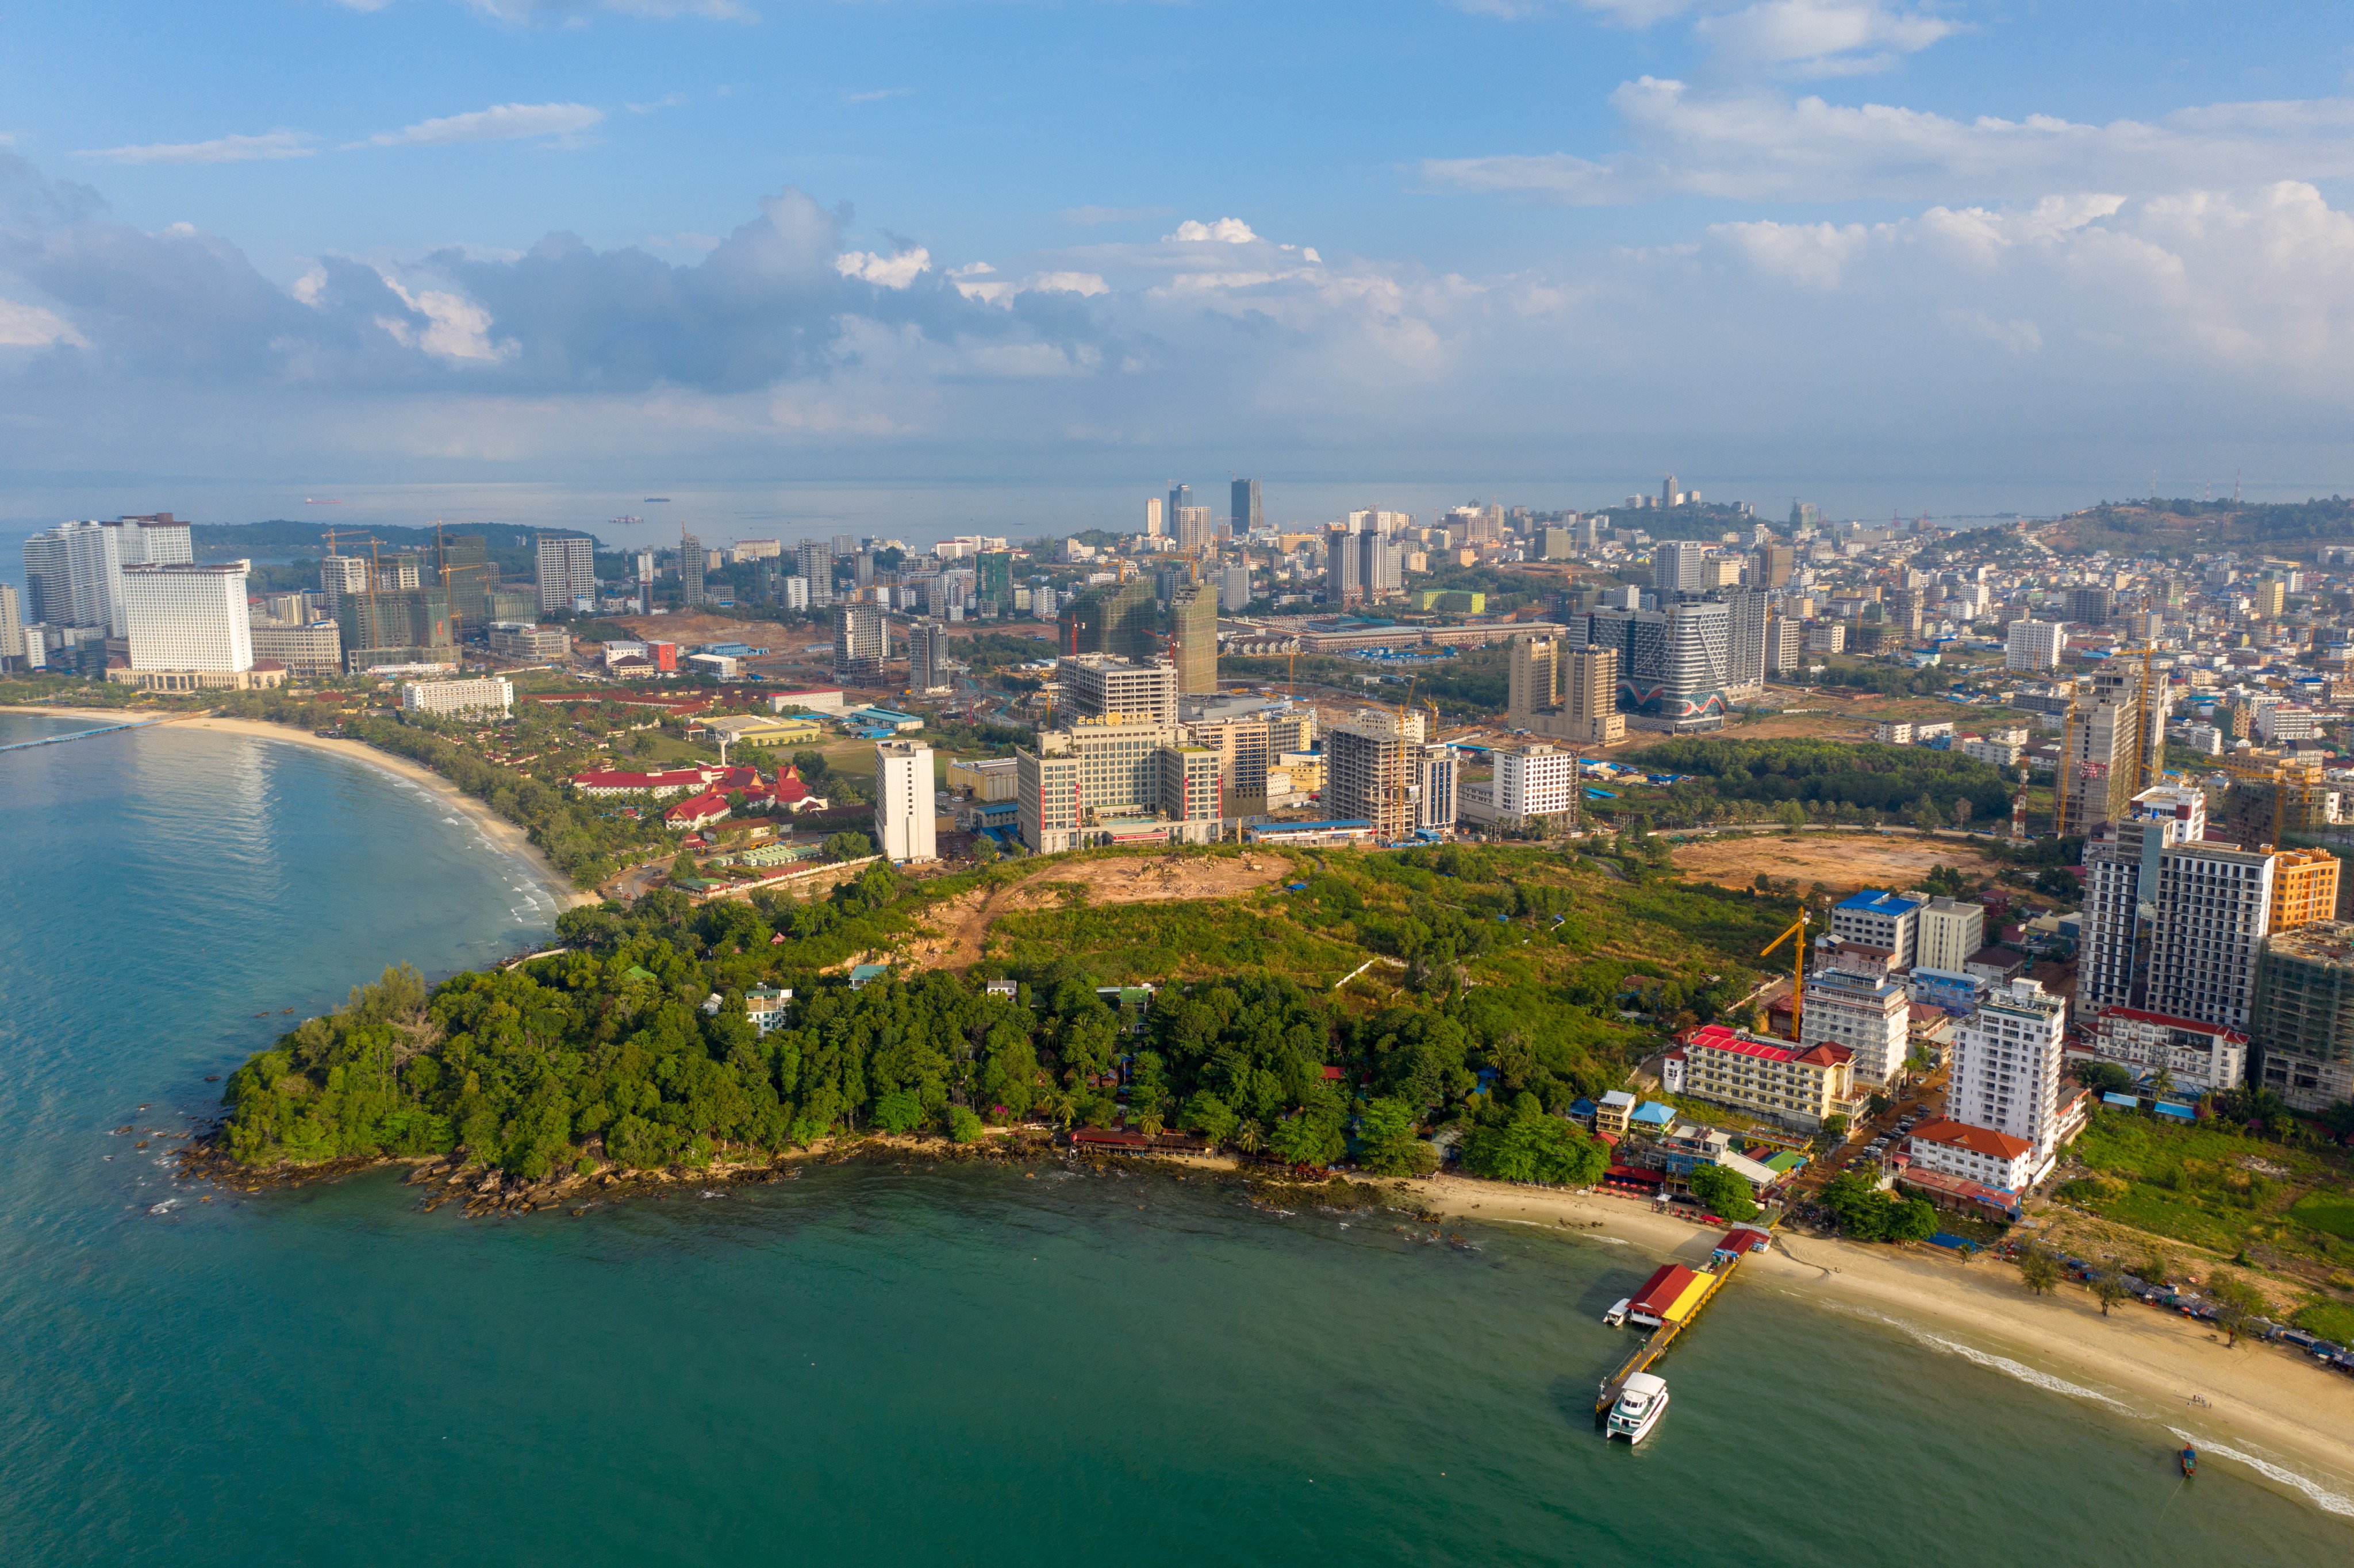 Sihanoukville in southern Cambodia, with its low taxes and easily obtained casino licences, became a hub for illegal online betting and cyberscams. Photo: Shutterstock